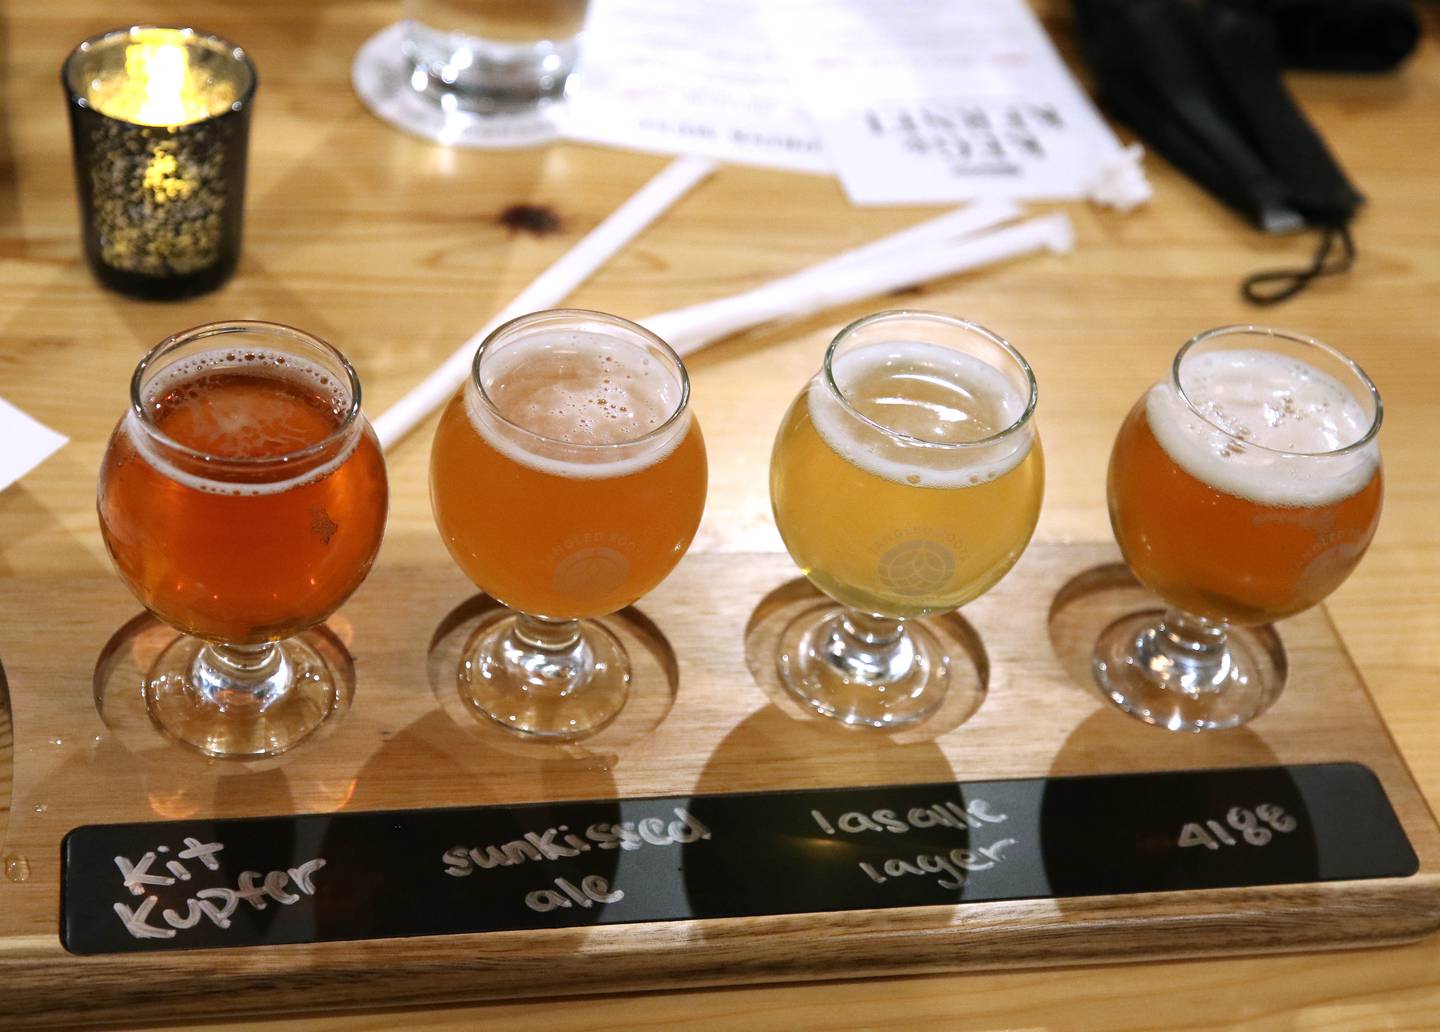 A flight of beer is served at Keg & Kernel by Tangled Roots Brewing Company Wednesday, Dec. 8, 2021, after the ribbon cutting ceremony at the restaurant at 106 East Lincoln Highway in DeKalb.